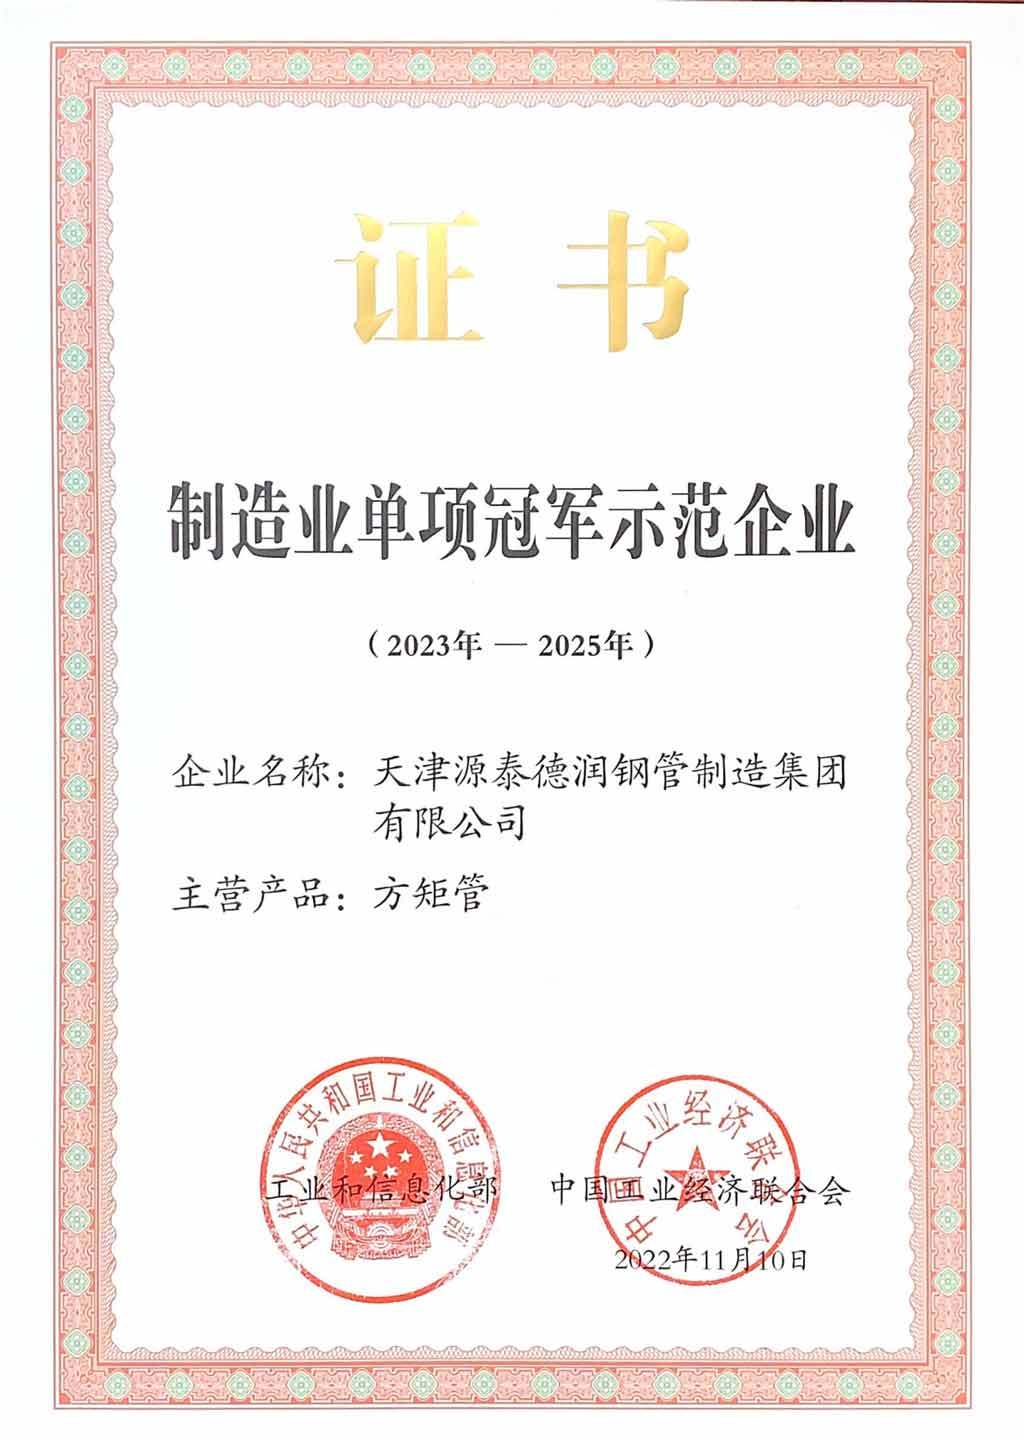 National Square Rectangular Steel Pipe Manufacturing Single Champion Certificate